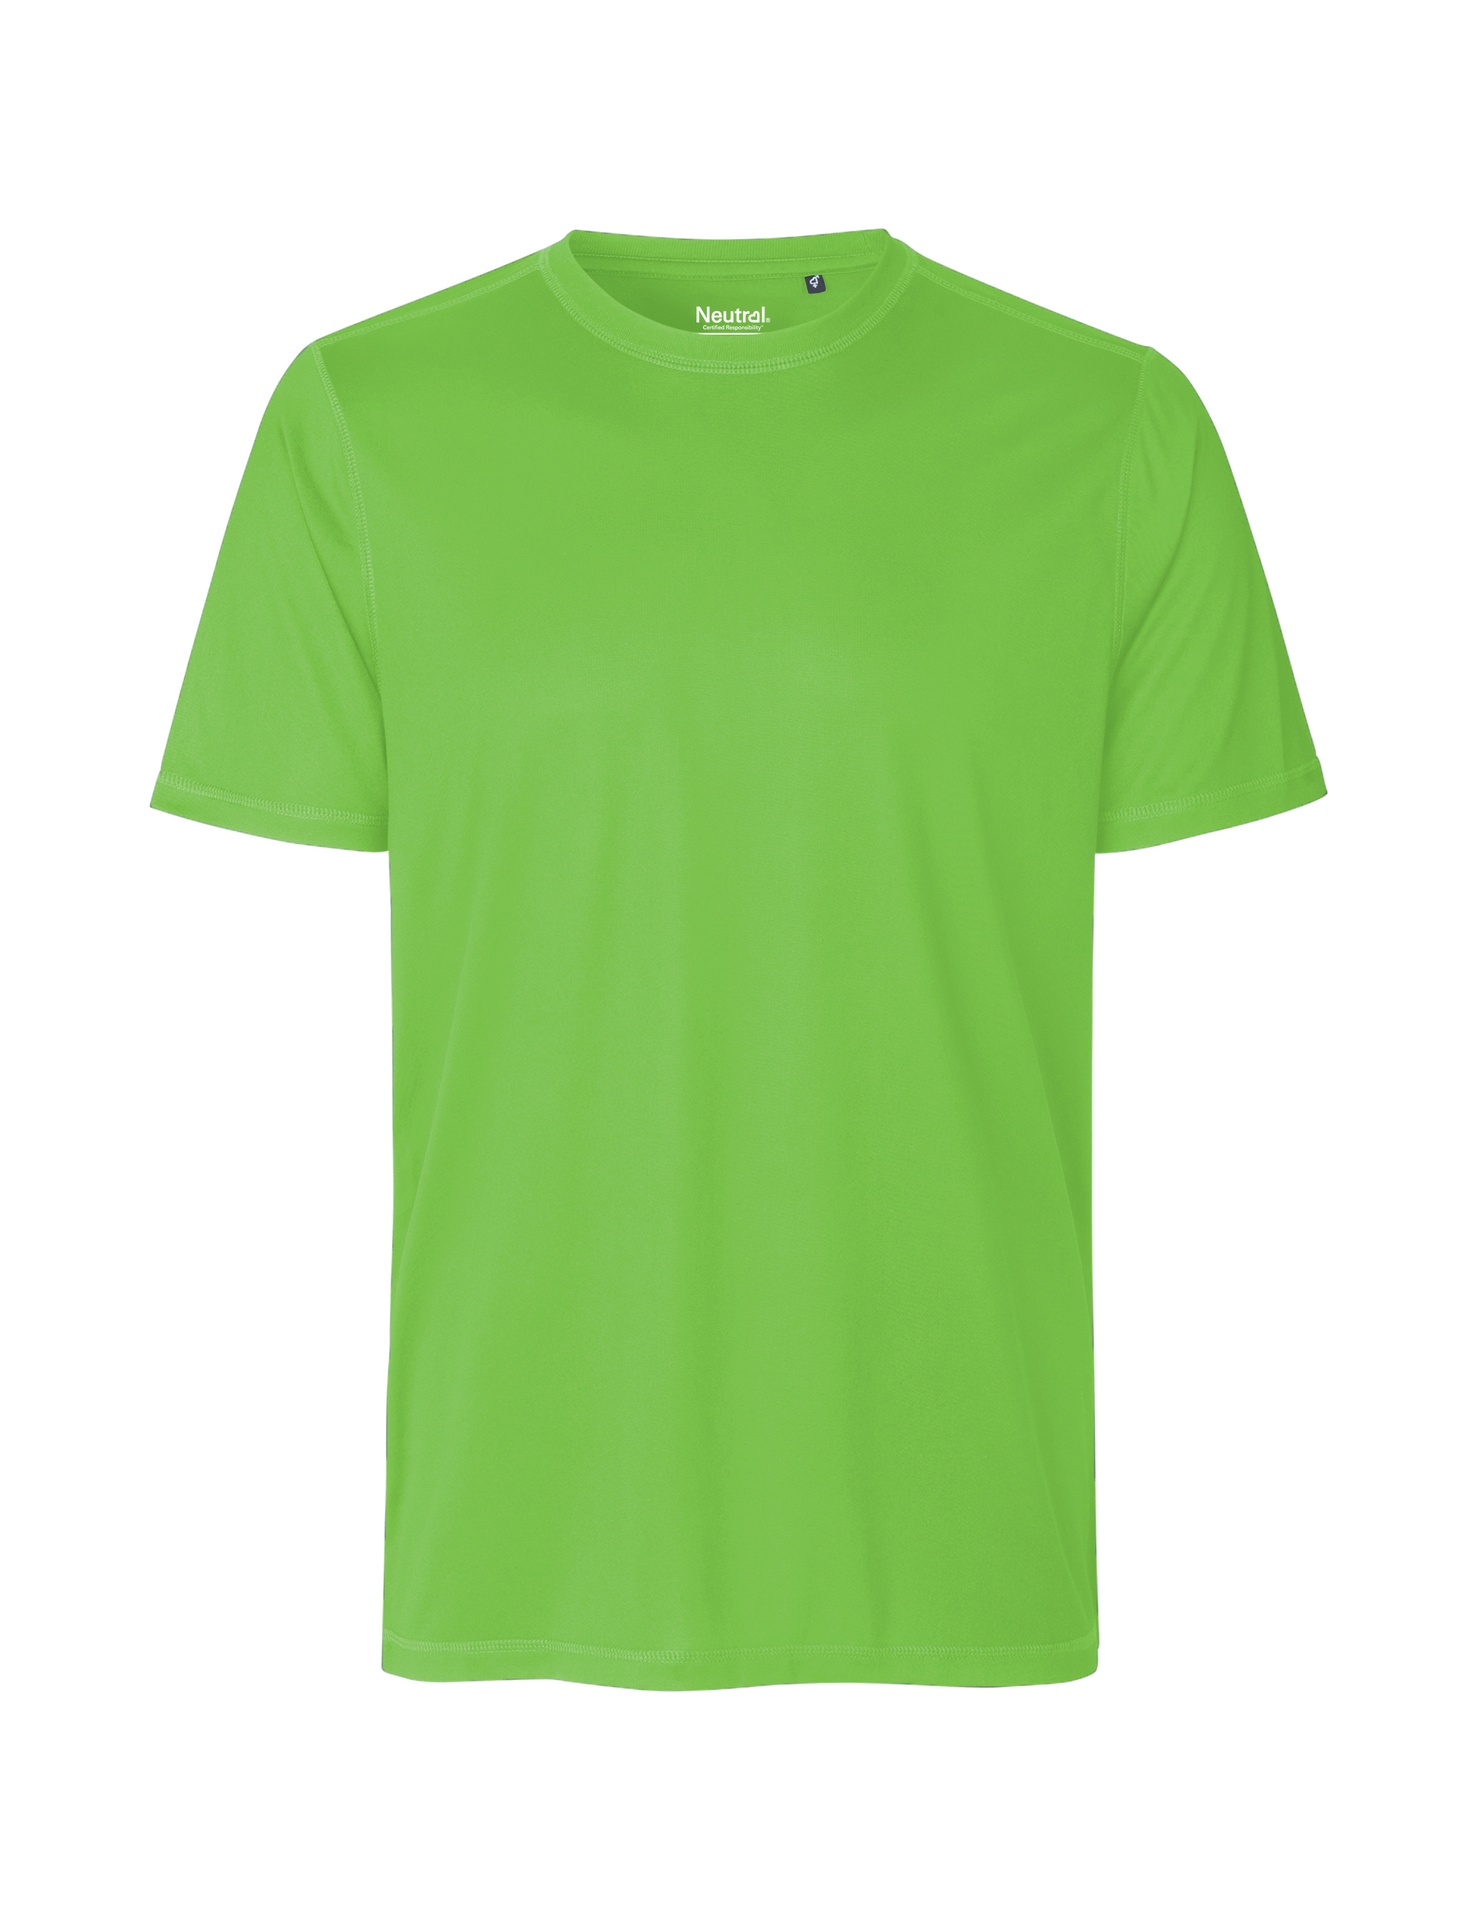 [PR/03778] Recycled Performance T-Shirt (Lime 12, S)